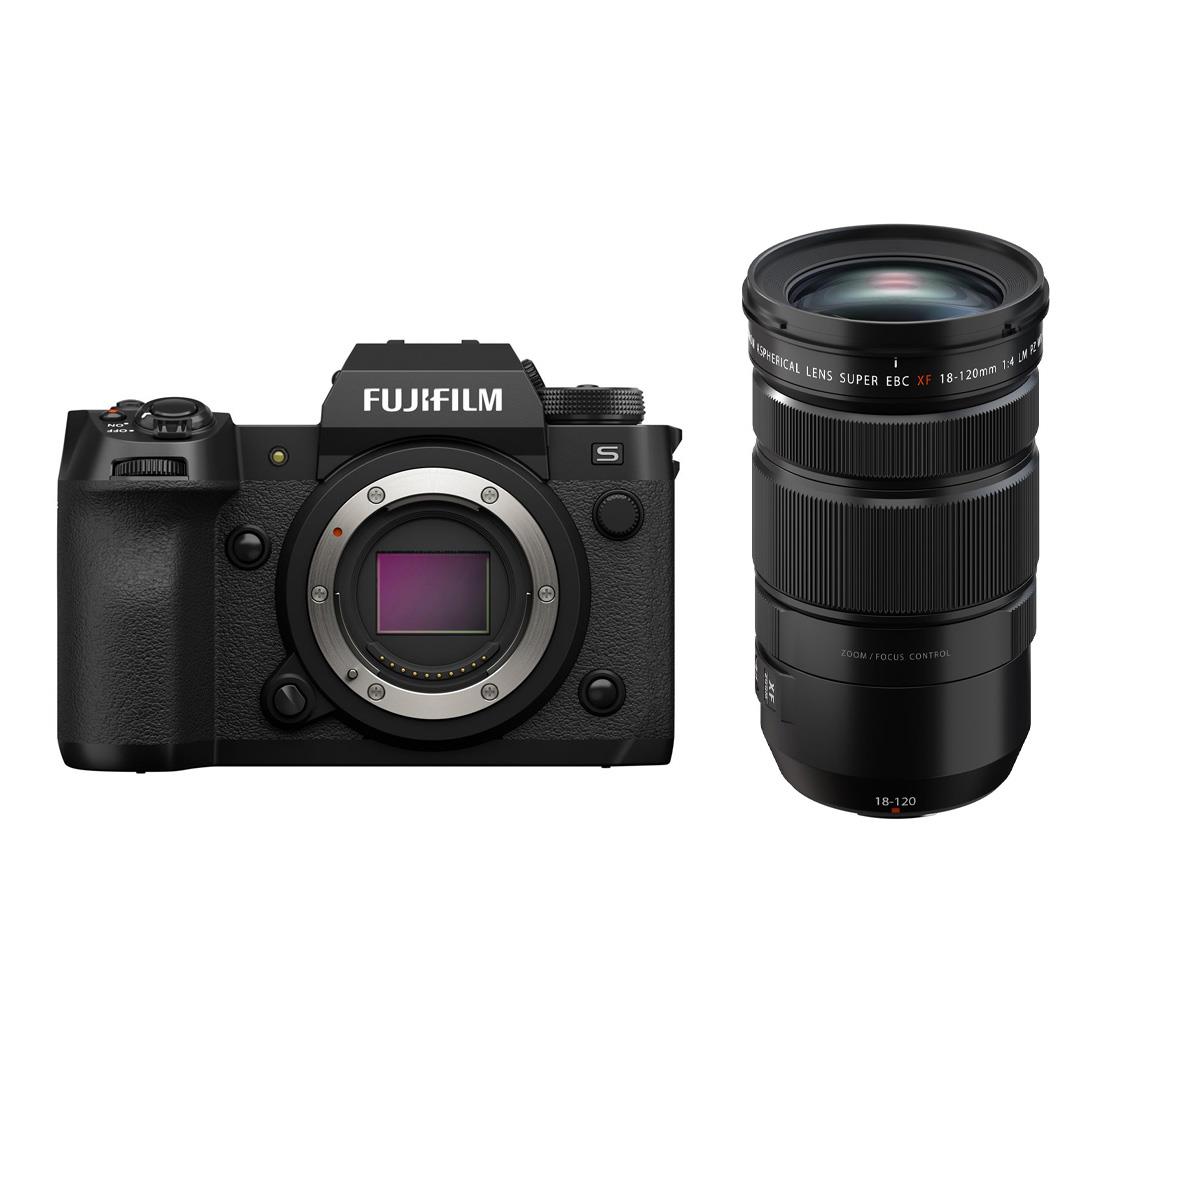 Image of Fujifilm X-H2S Mirrorless Camera with XF 18-120mm f/4 LM PZ WR Lens